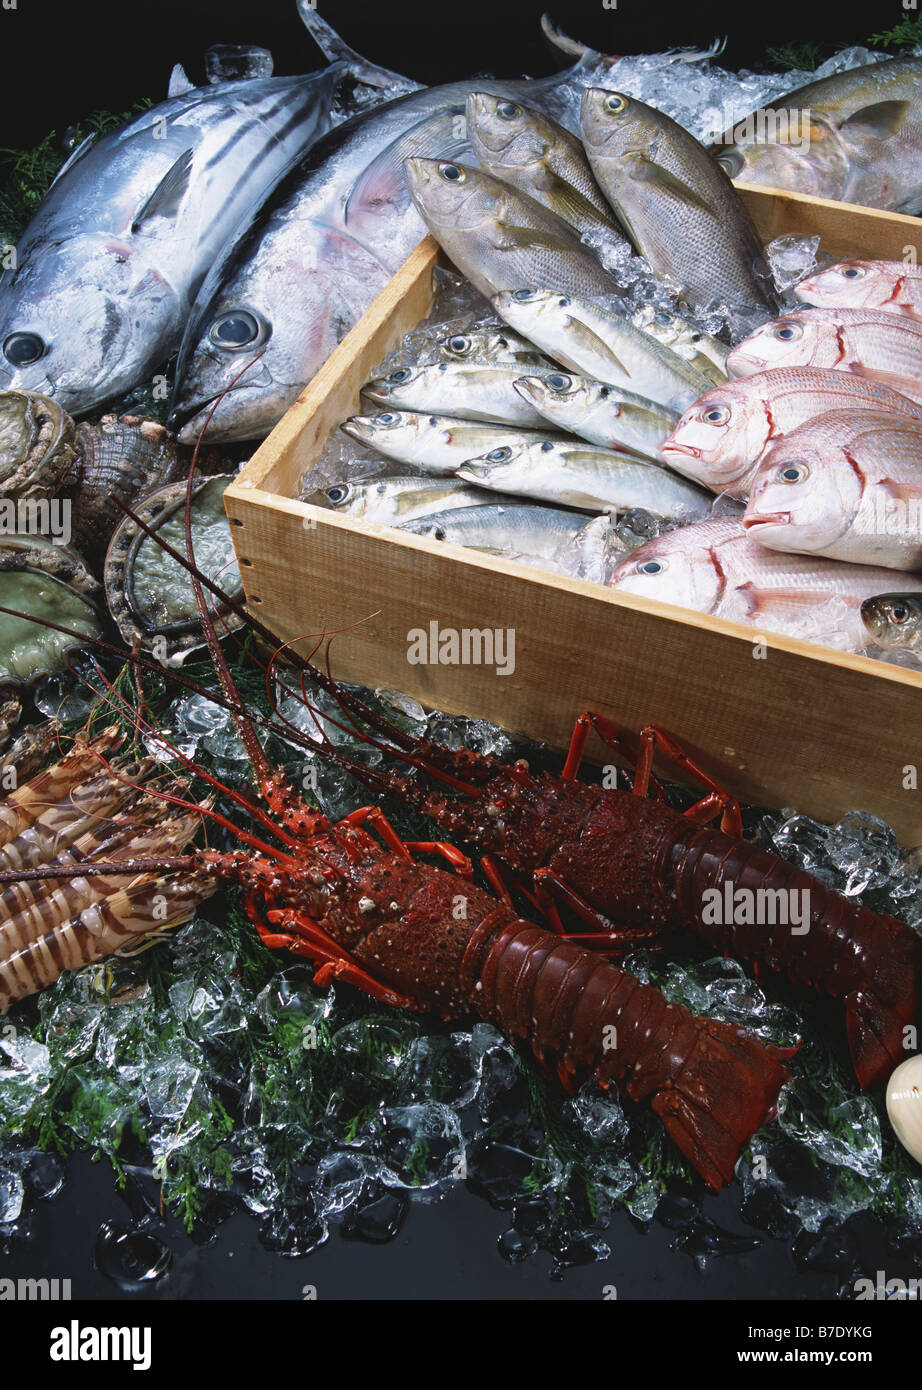 Fishery Products Stock Photo